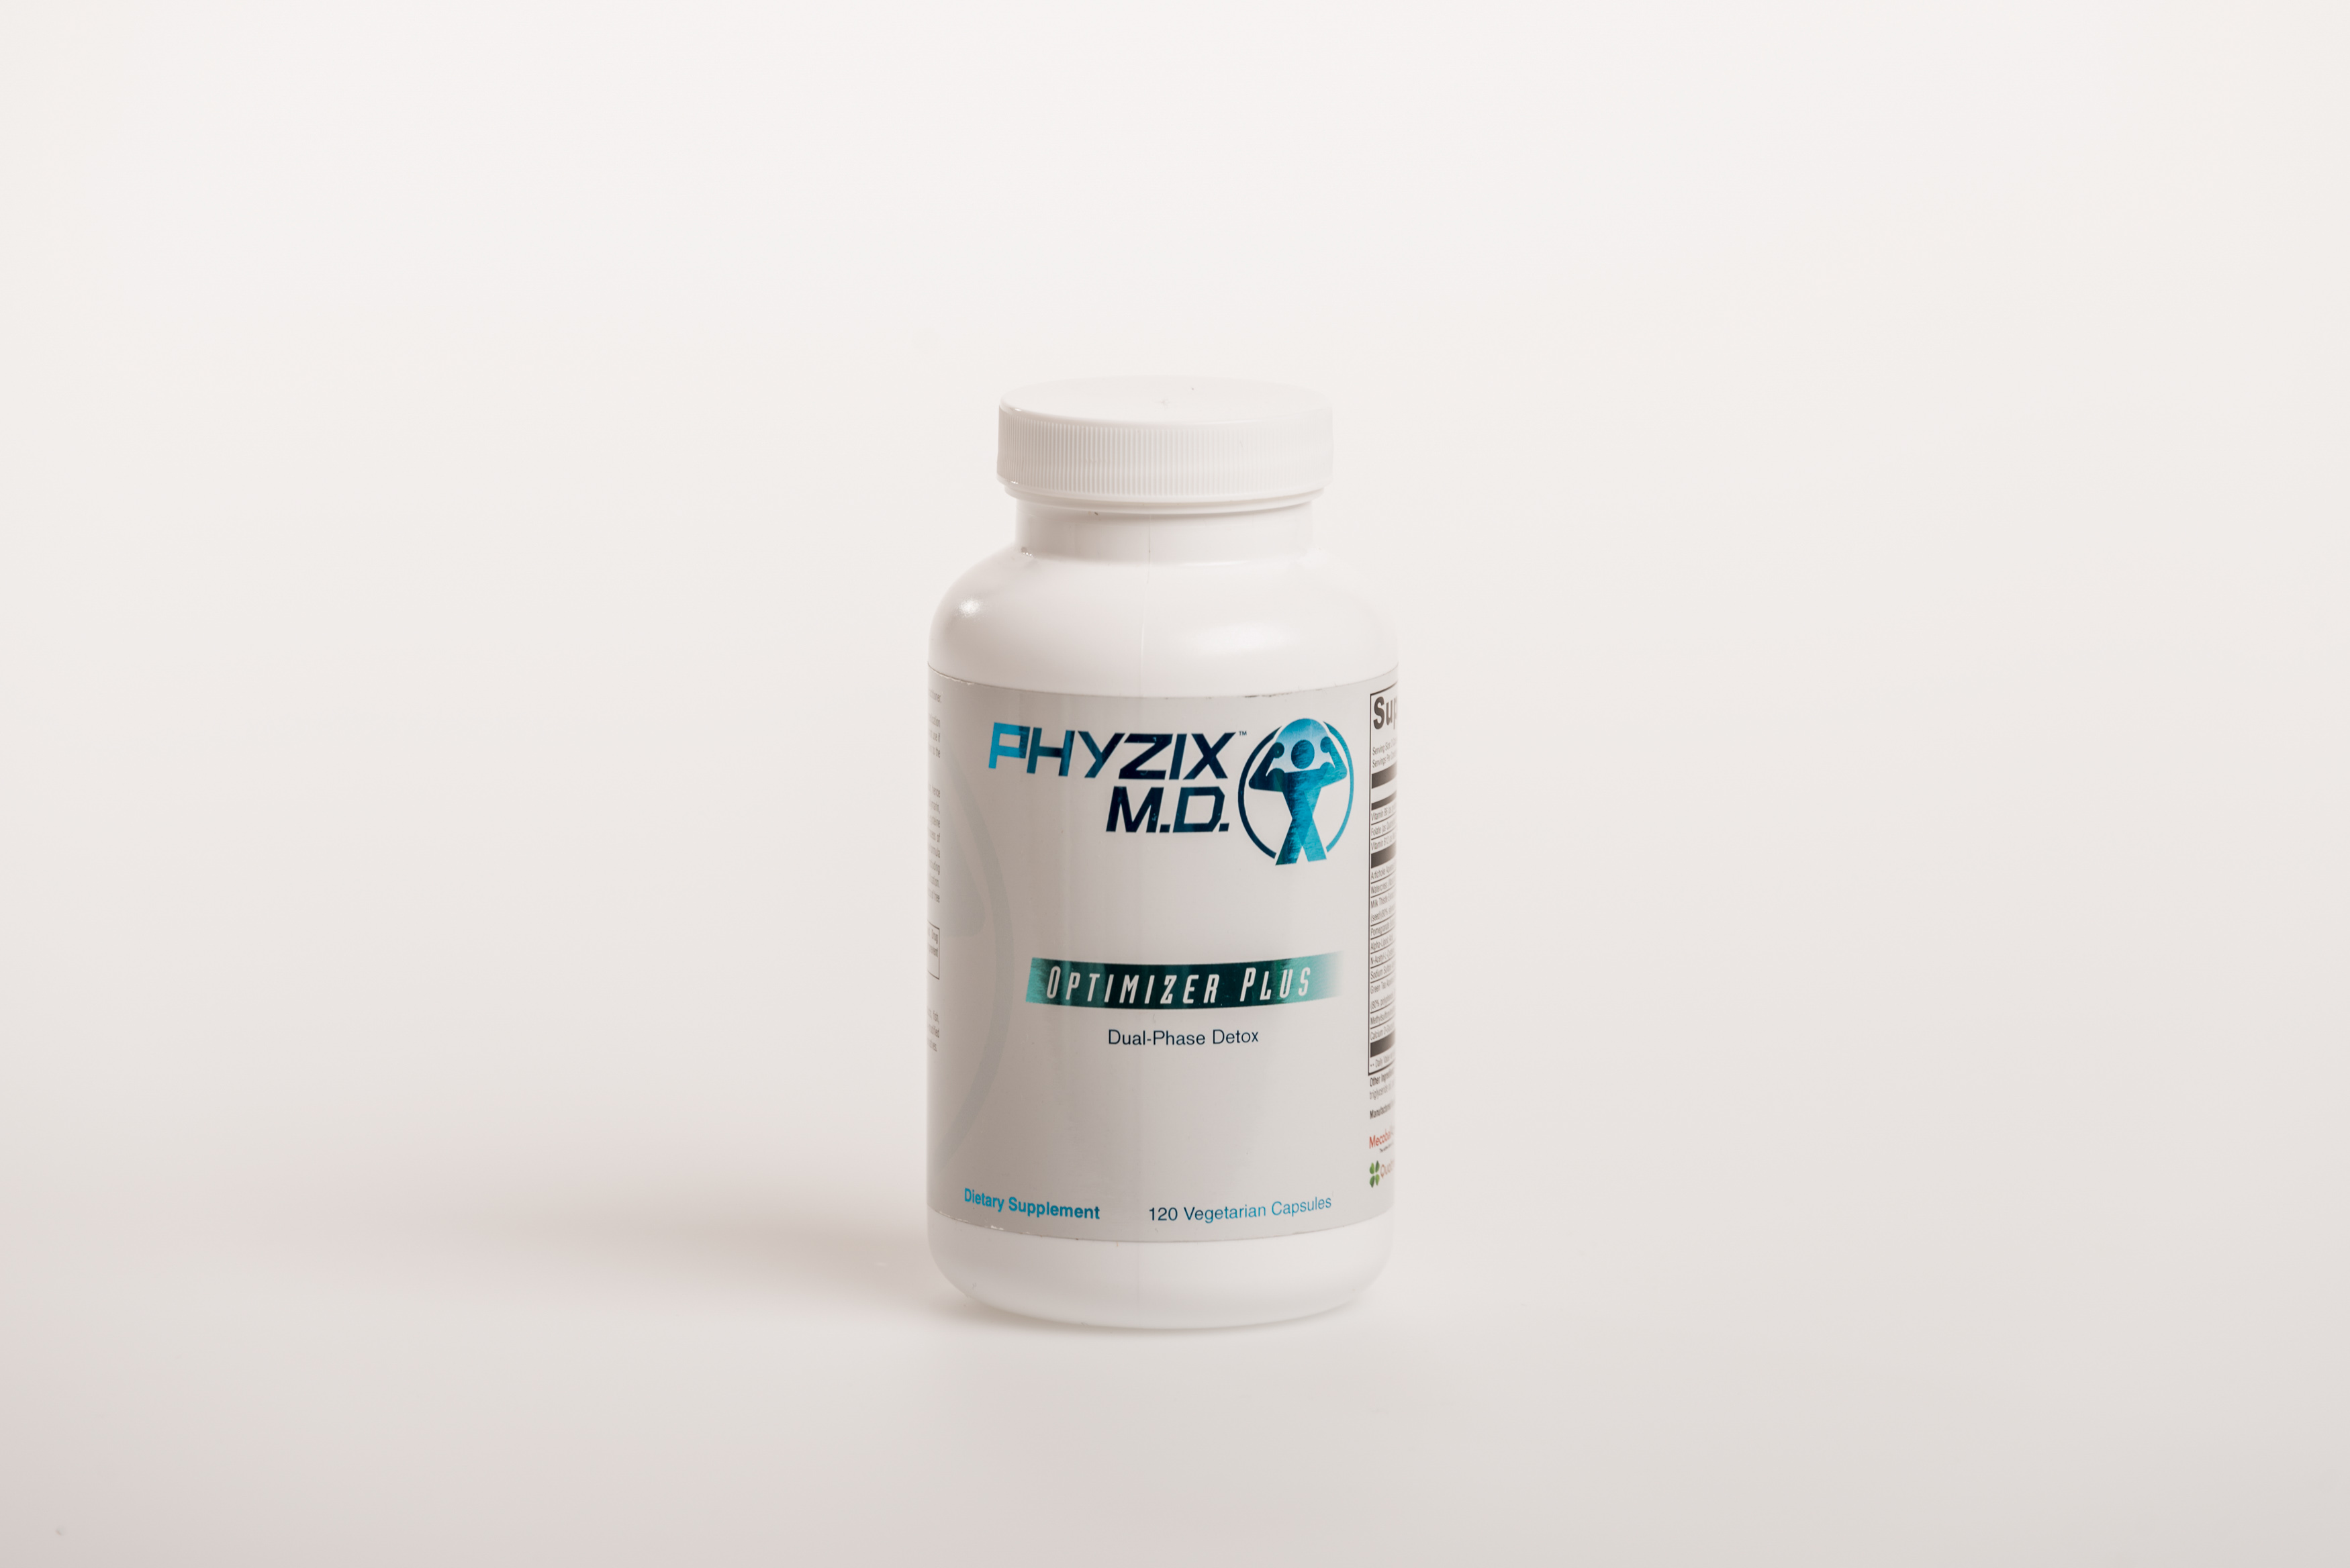 The Phyzix MD Cleanse comes with Optimizer Plus. 